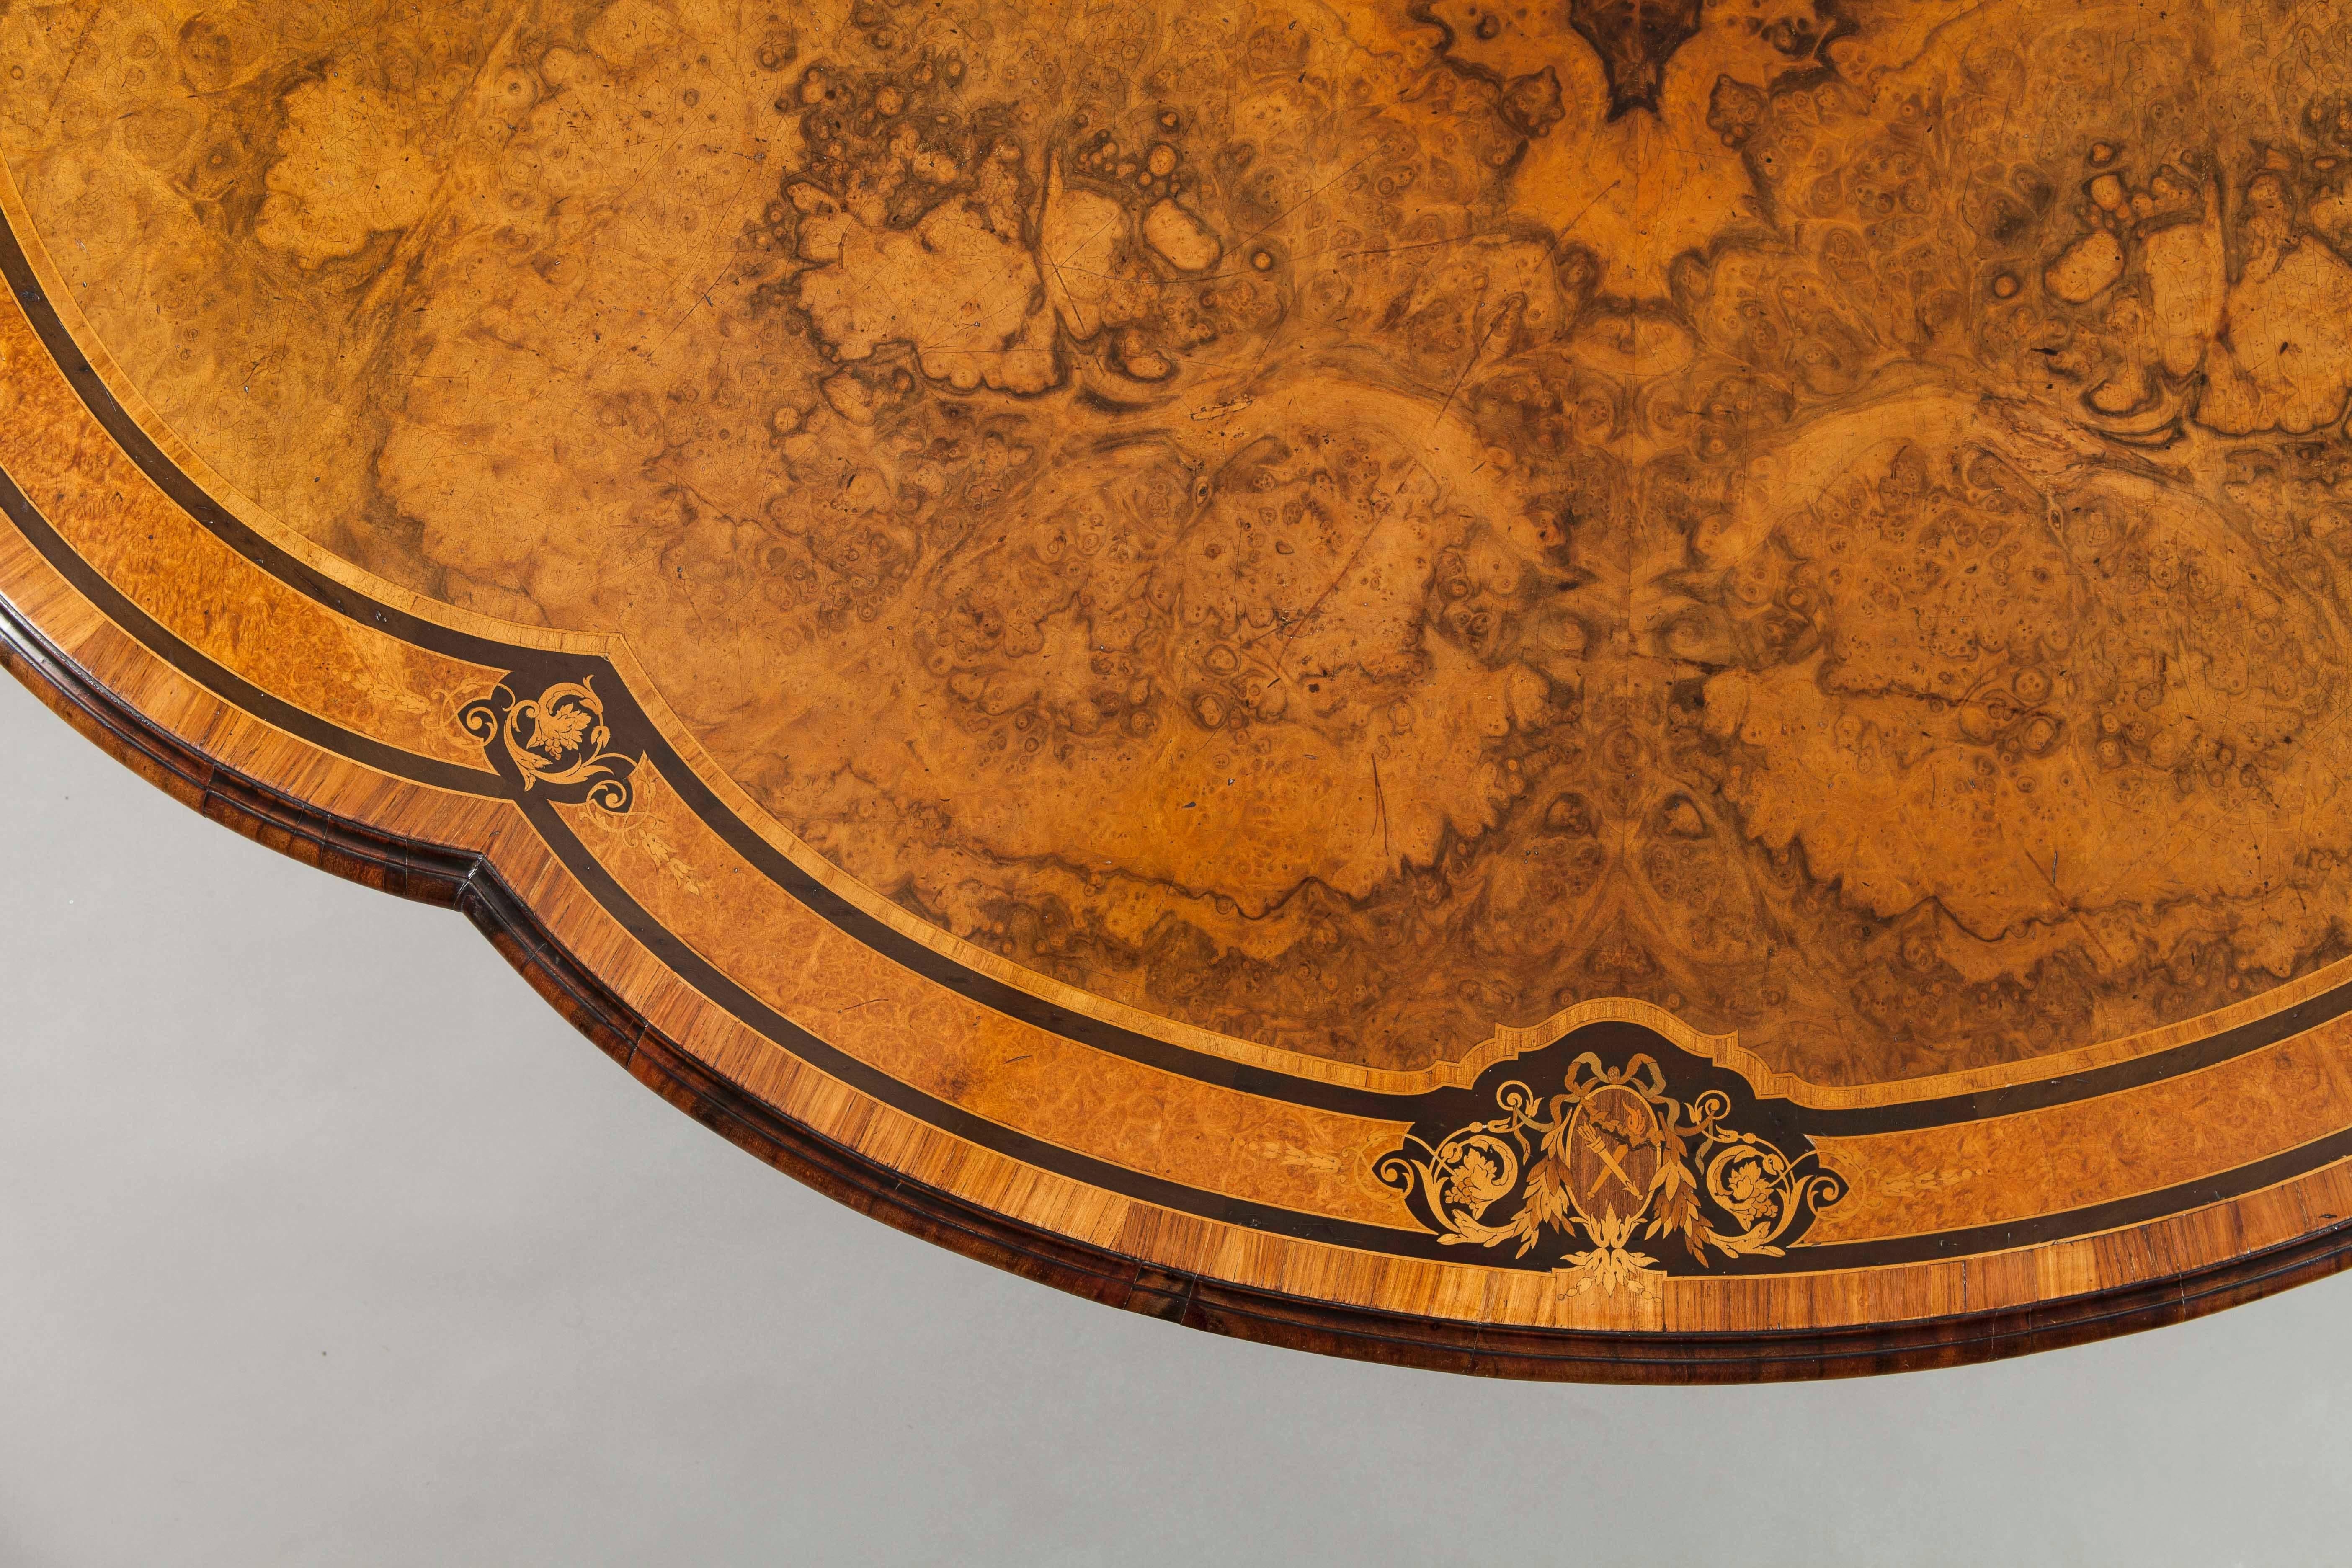 An Antique Shaped Centre Table by Gillows

Constructed in Circassian walnut, with specimen woods inlays, and gilt metal adornments; rising from a castor shod scrolled leg quadripartite base, carved with foliates; a central shaped baluster form